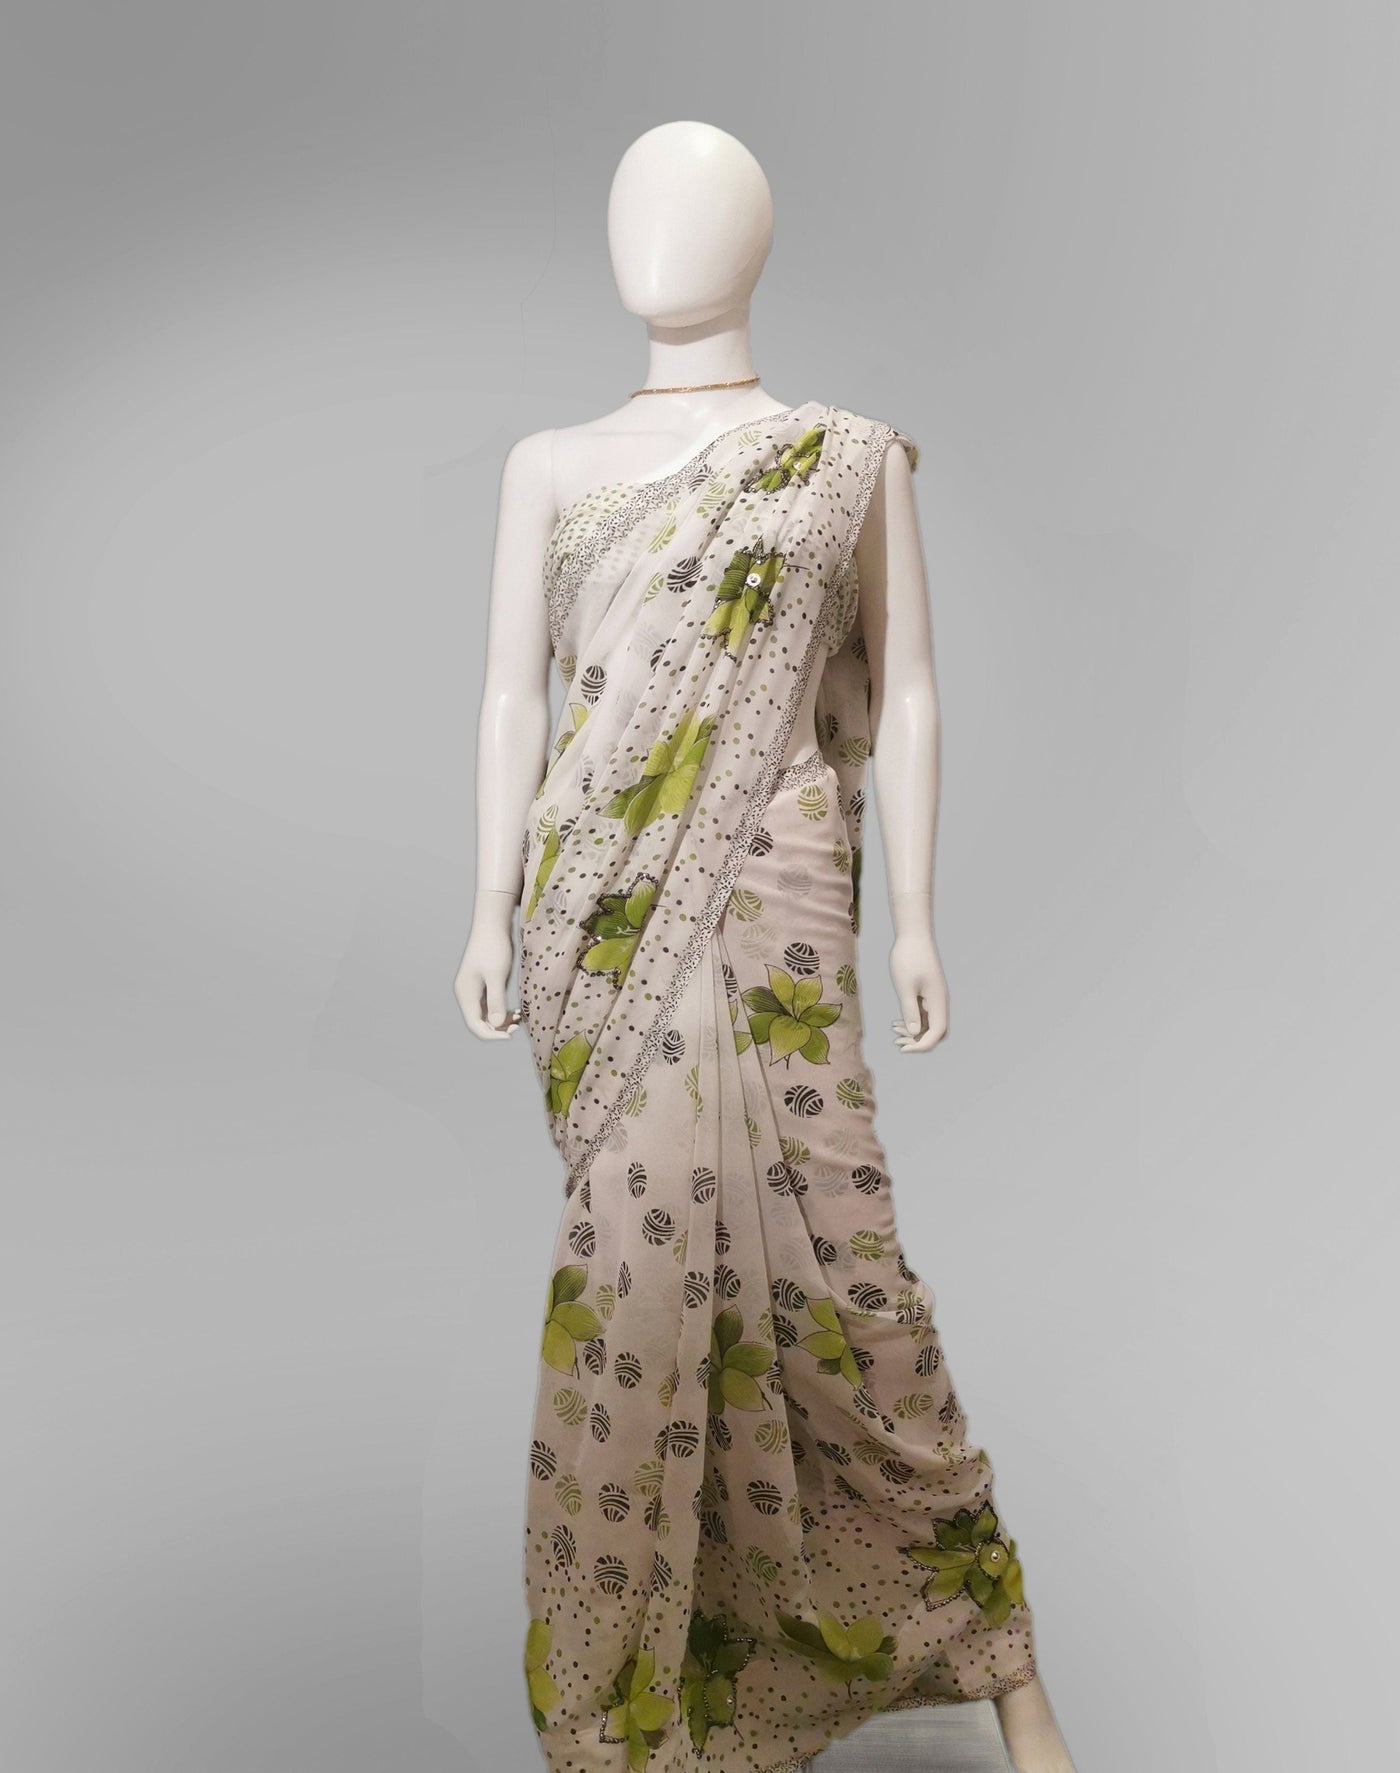 Saree in White and Green Floral Featured with Sequin Work - Indian Clothing in Denver, CO, Aurora, CO, Boulder, CO, Fort Collins, CO, Colorado Springs, CO, Parker, CO, Highlands Ranch, CO, Cherry Creek, CO, Centennial, CO, and Longmont, CO. Nationwide shipping USA - India Fashion X